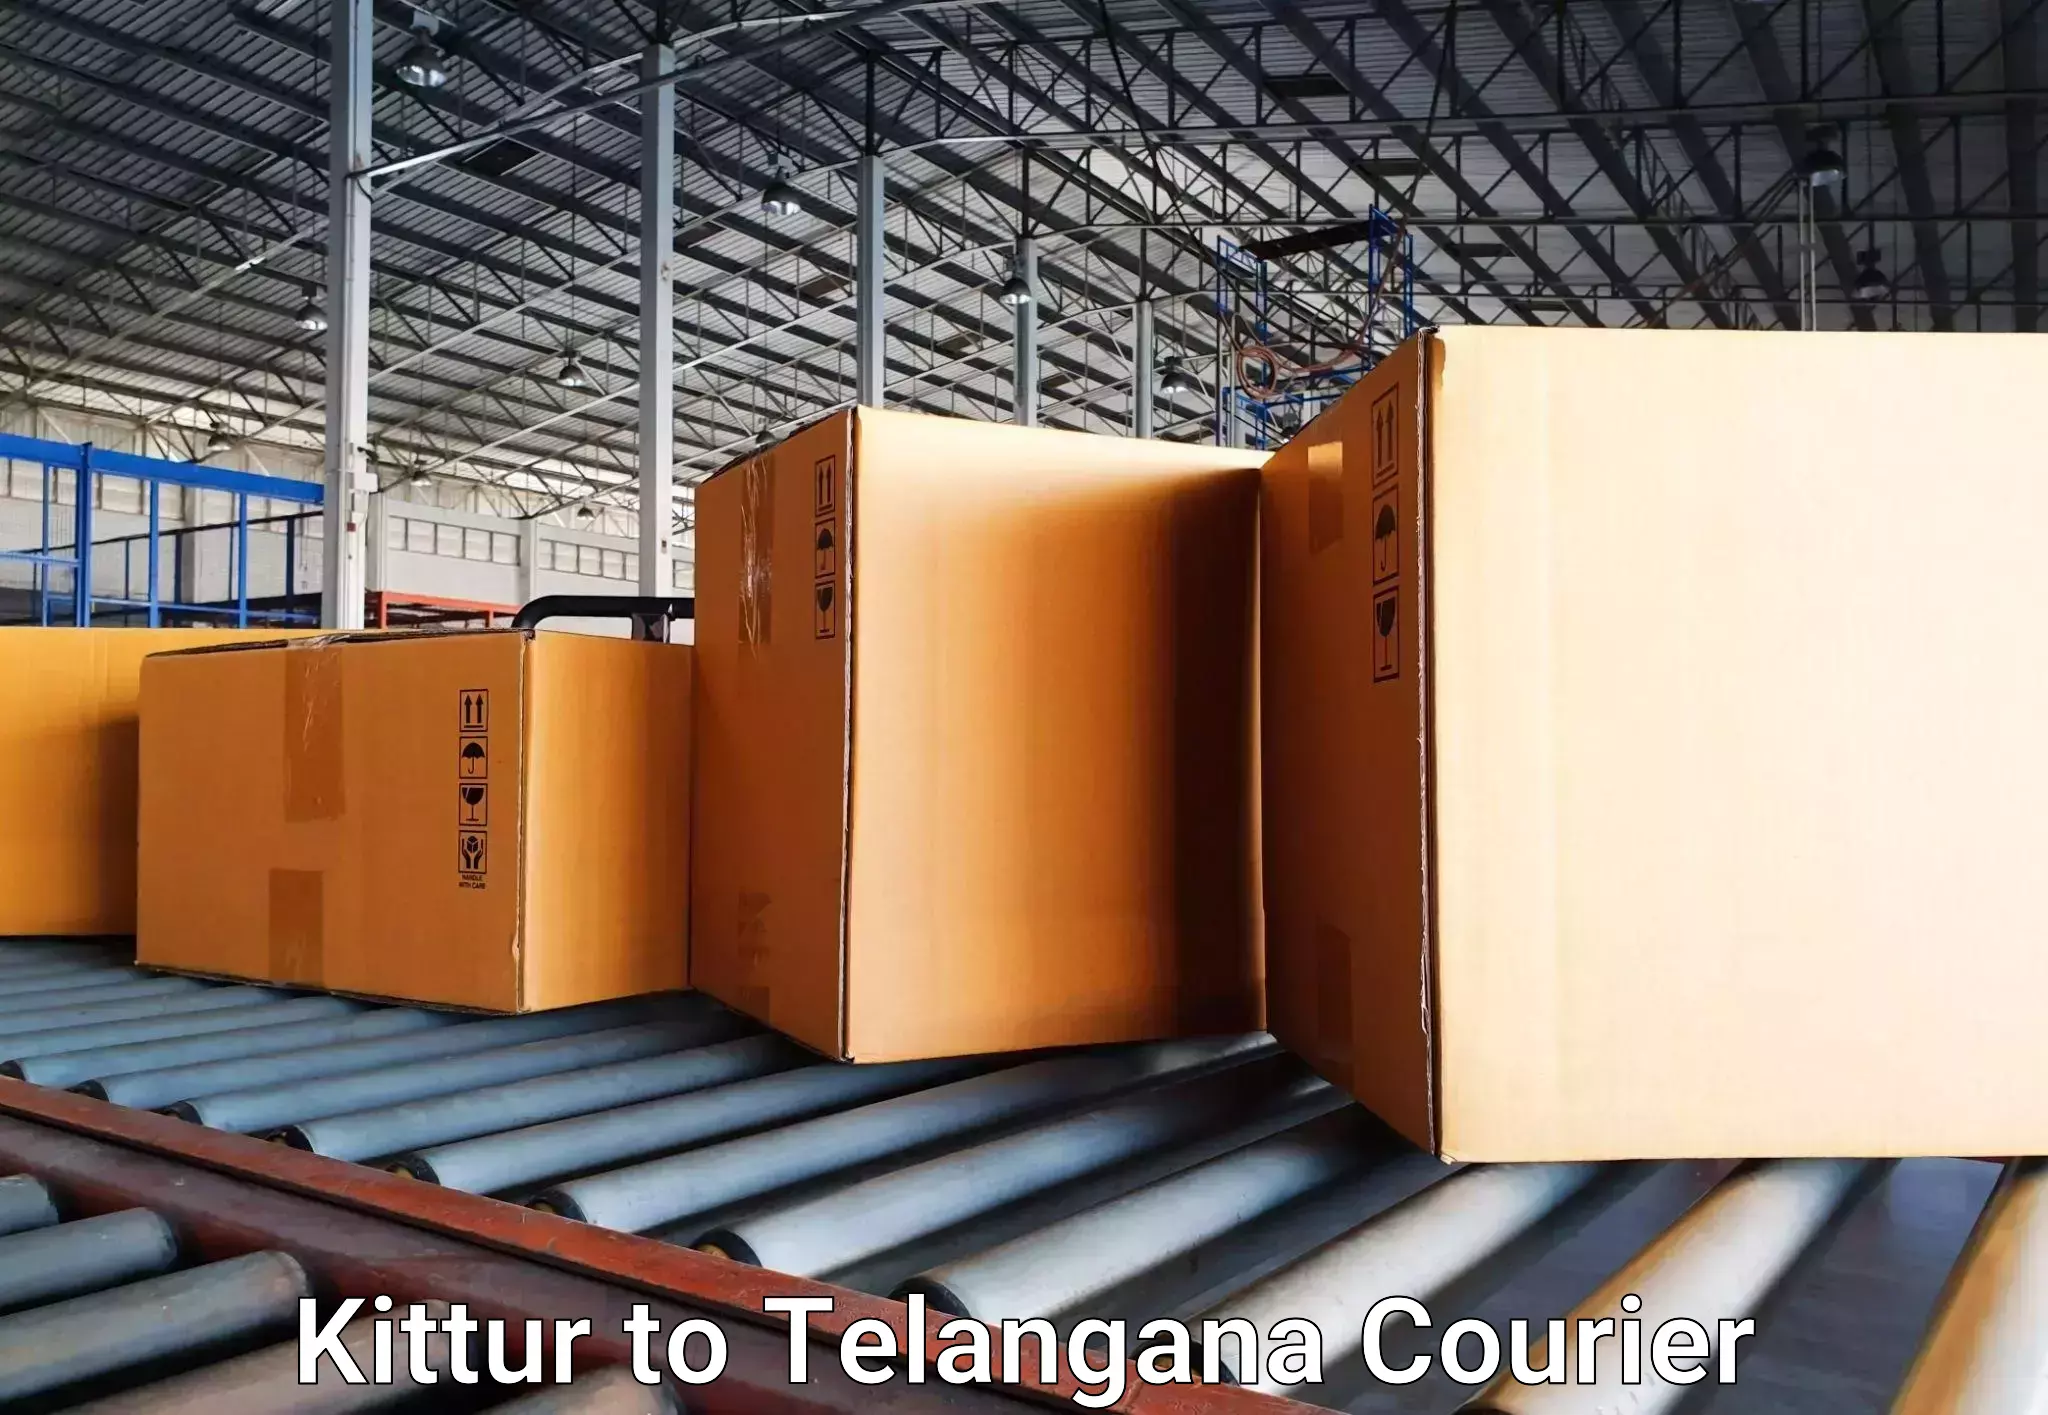 Online luggage shipping in Kittur to Marikal